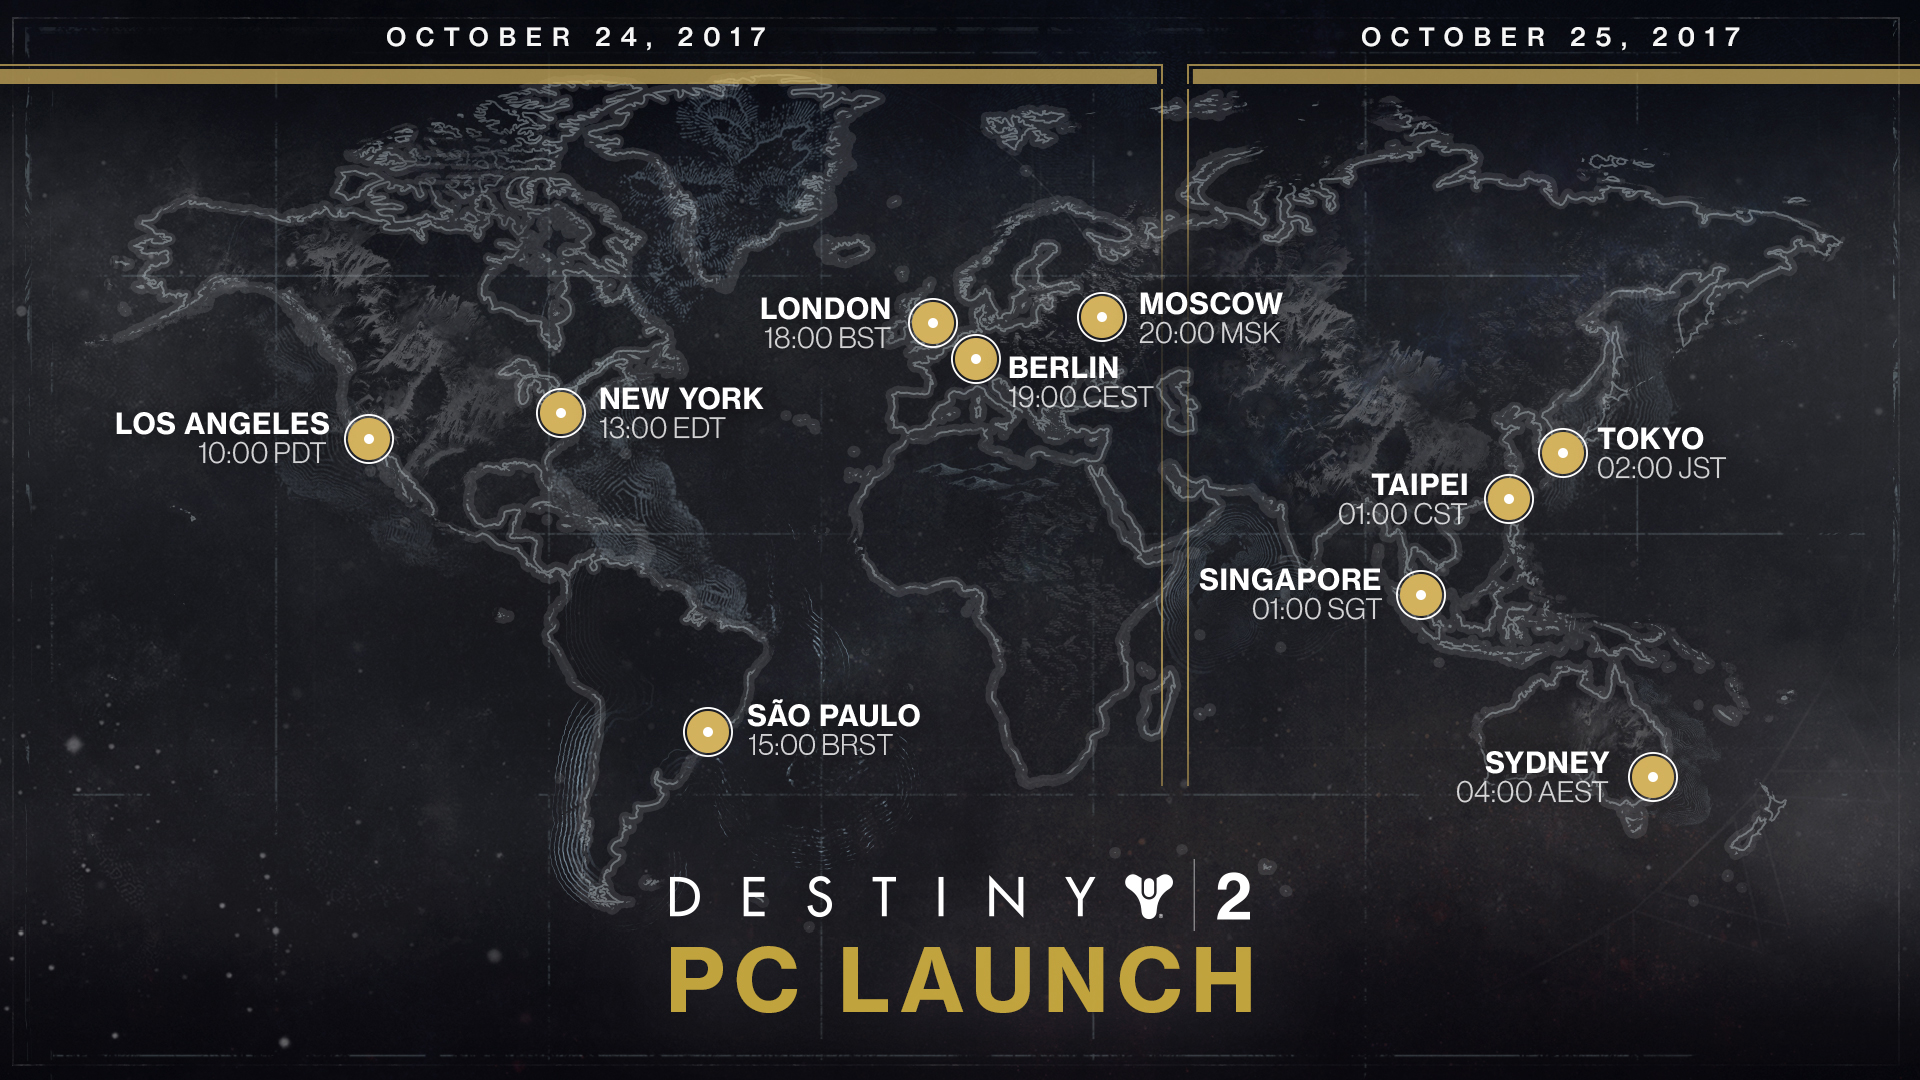 This Week At Bungie –10/19/2017 > News | Bungie.net